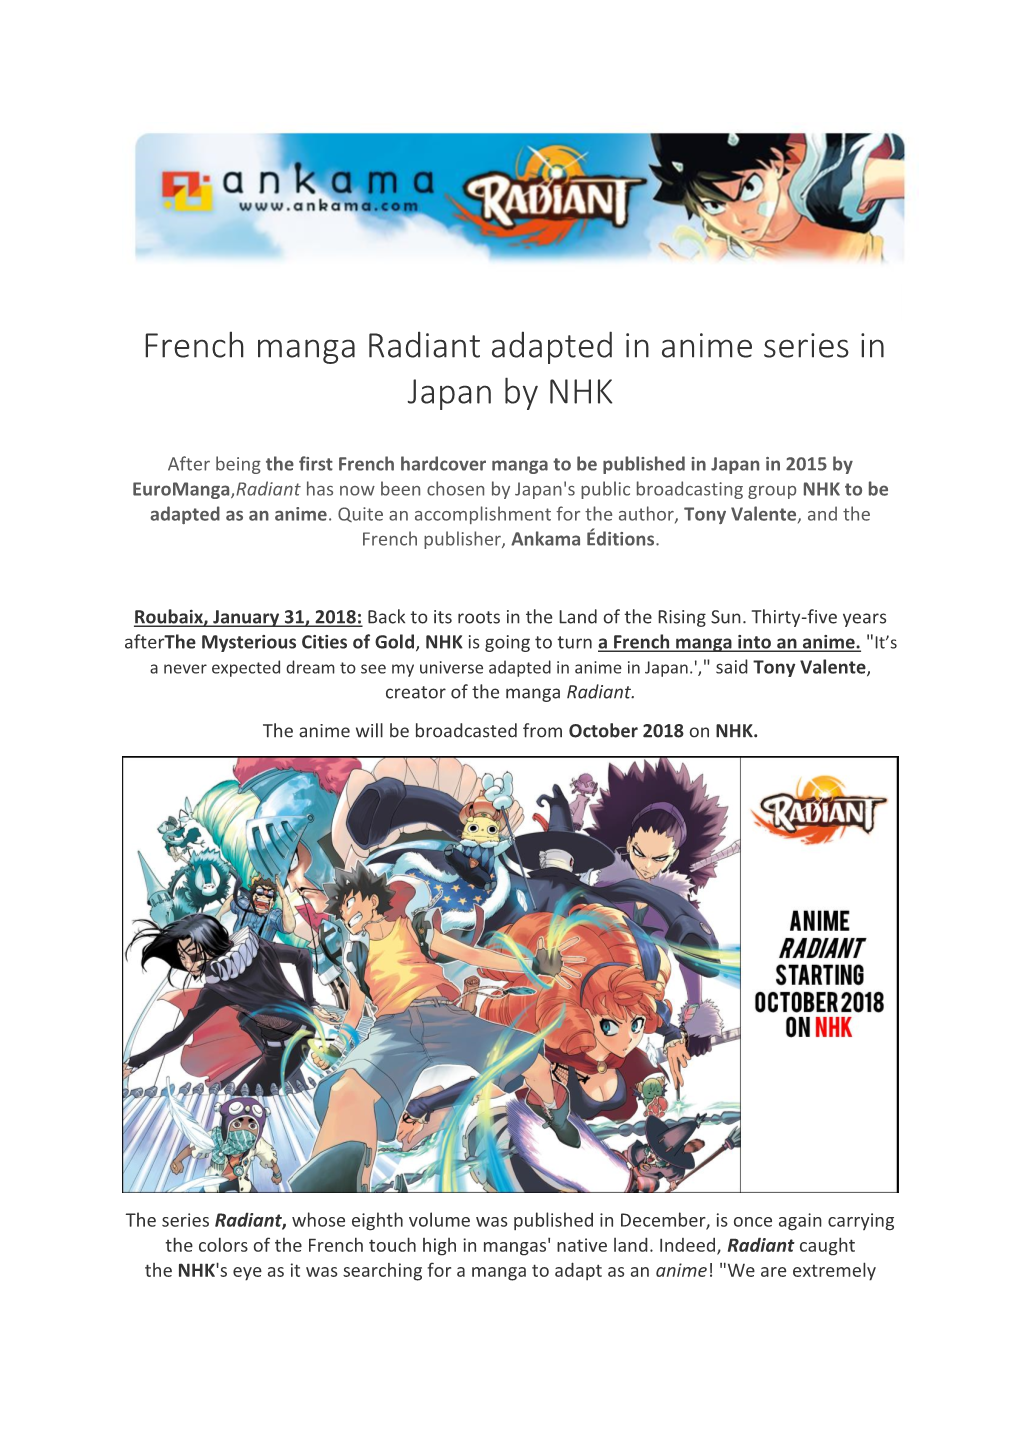 French Manga Radiant Adapted in Anime Series in Japan by NHK